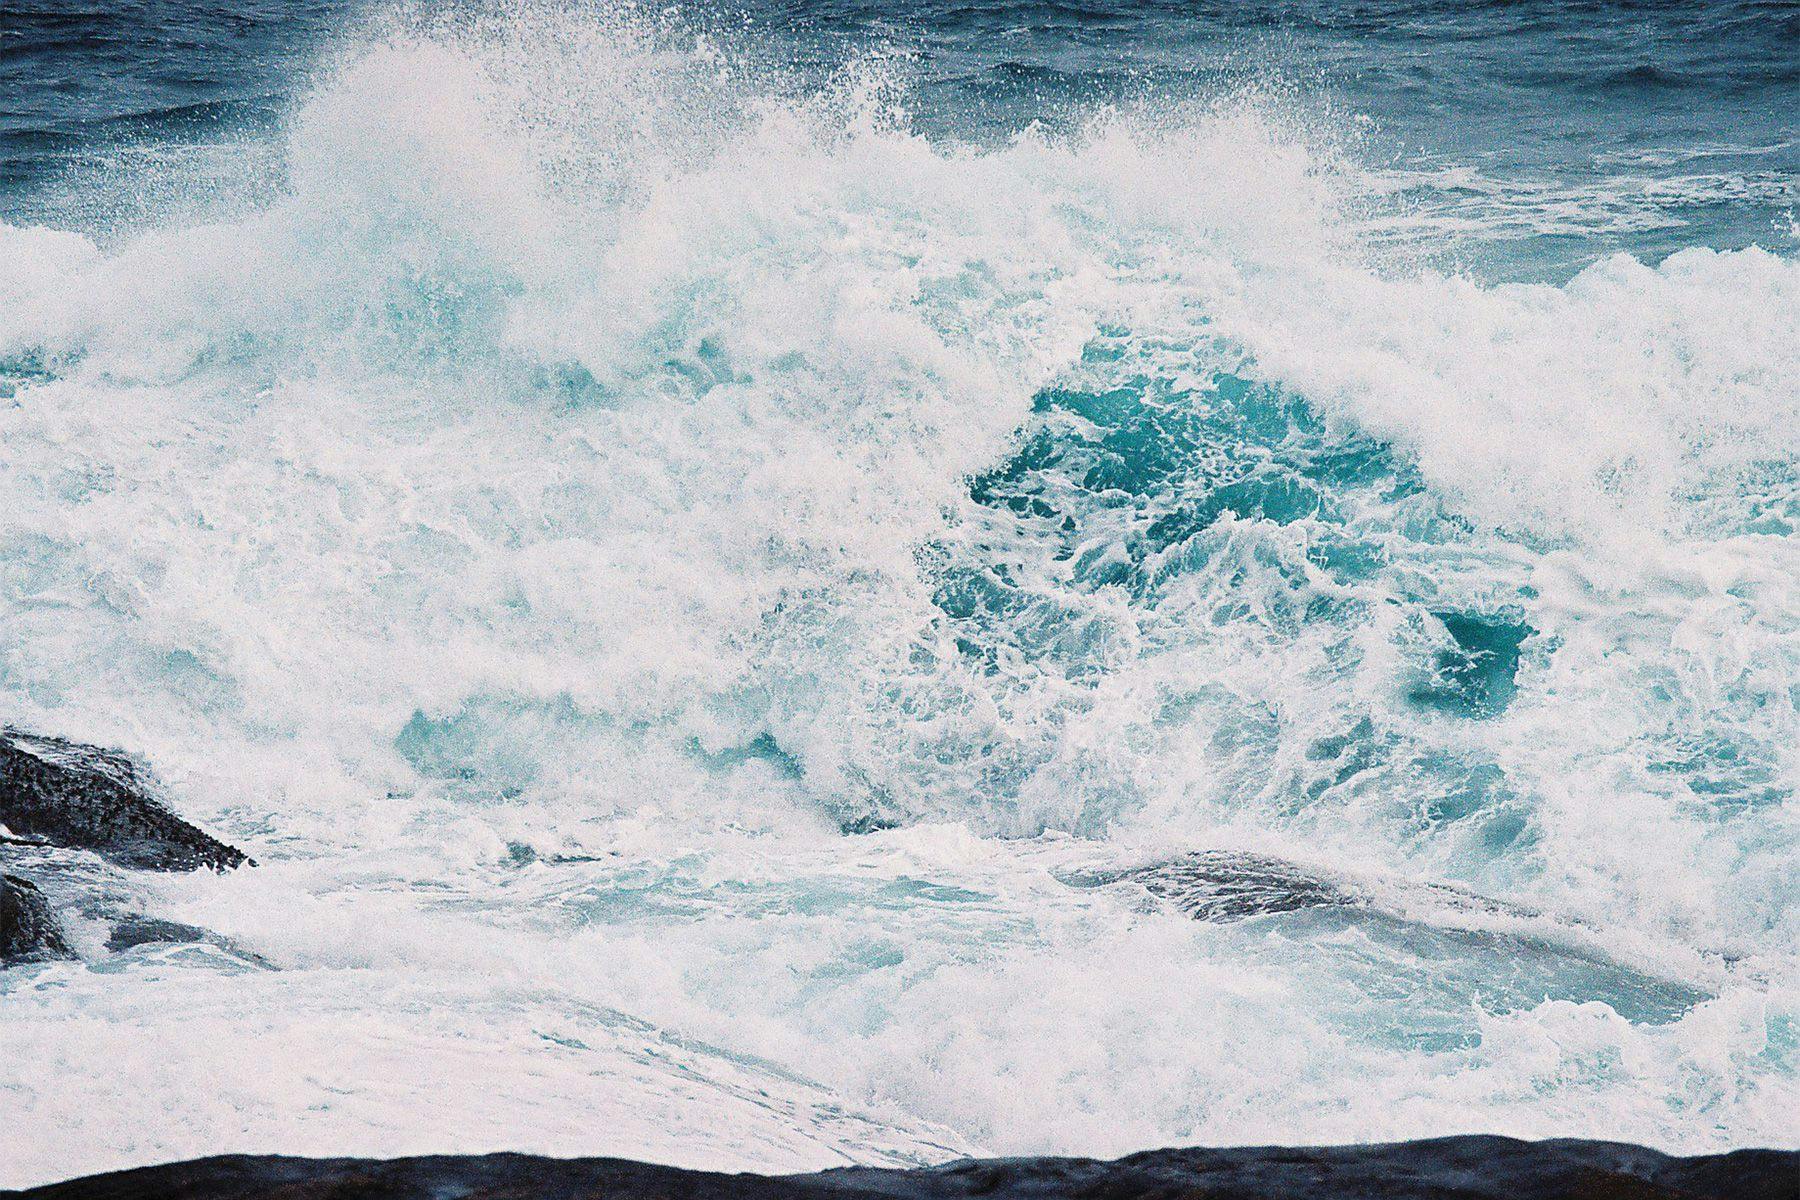 large waves smashing into one another where the indian ocean meets the southern ocean at cape leeuwin